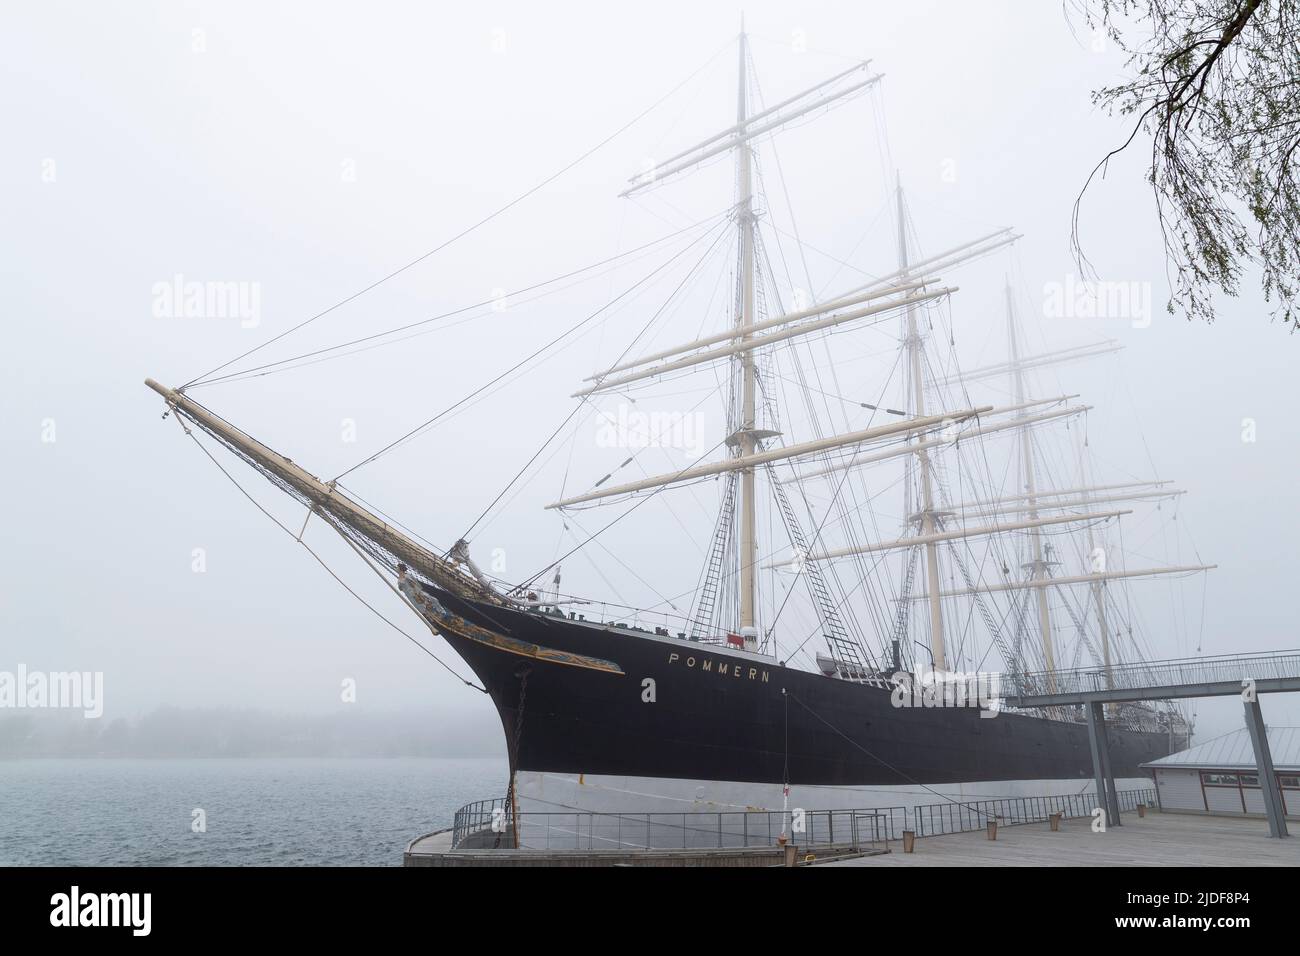 Historic museum ship Pommern moored at harbour in Mariehamn, Åland Islands, Finland, on a foggy day. Stock Photo